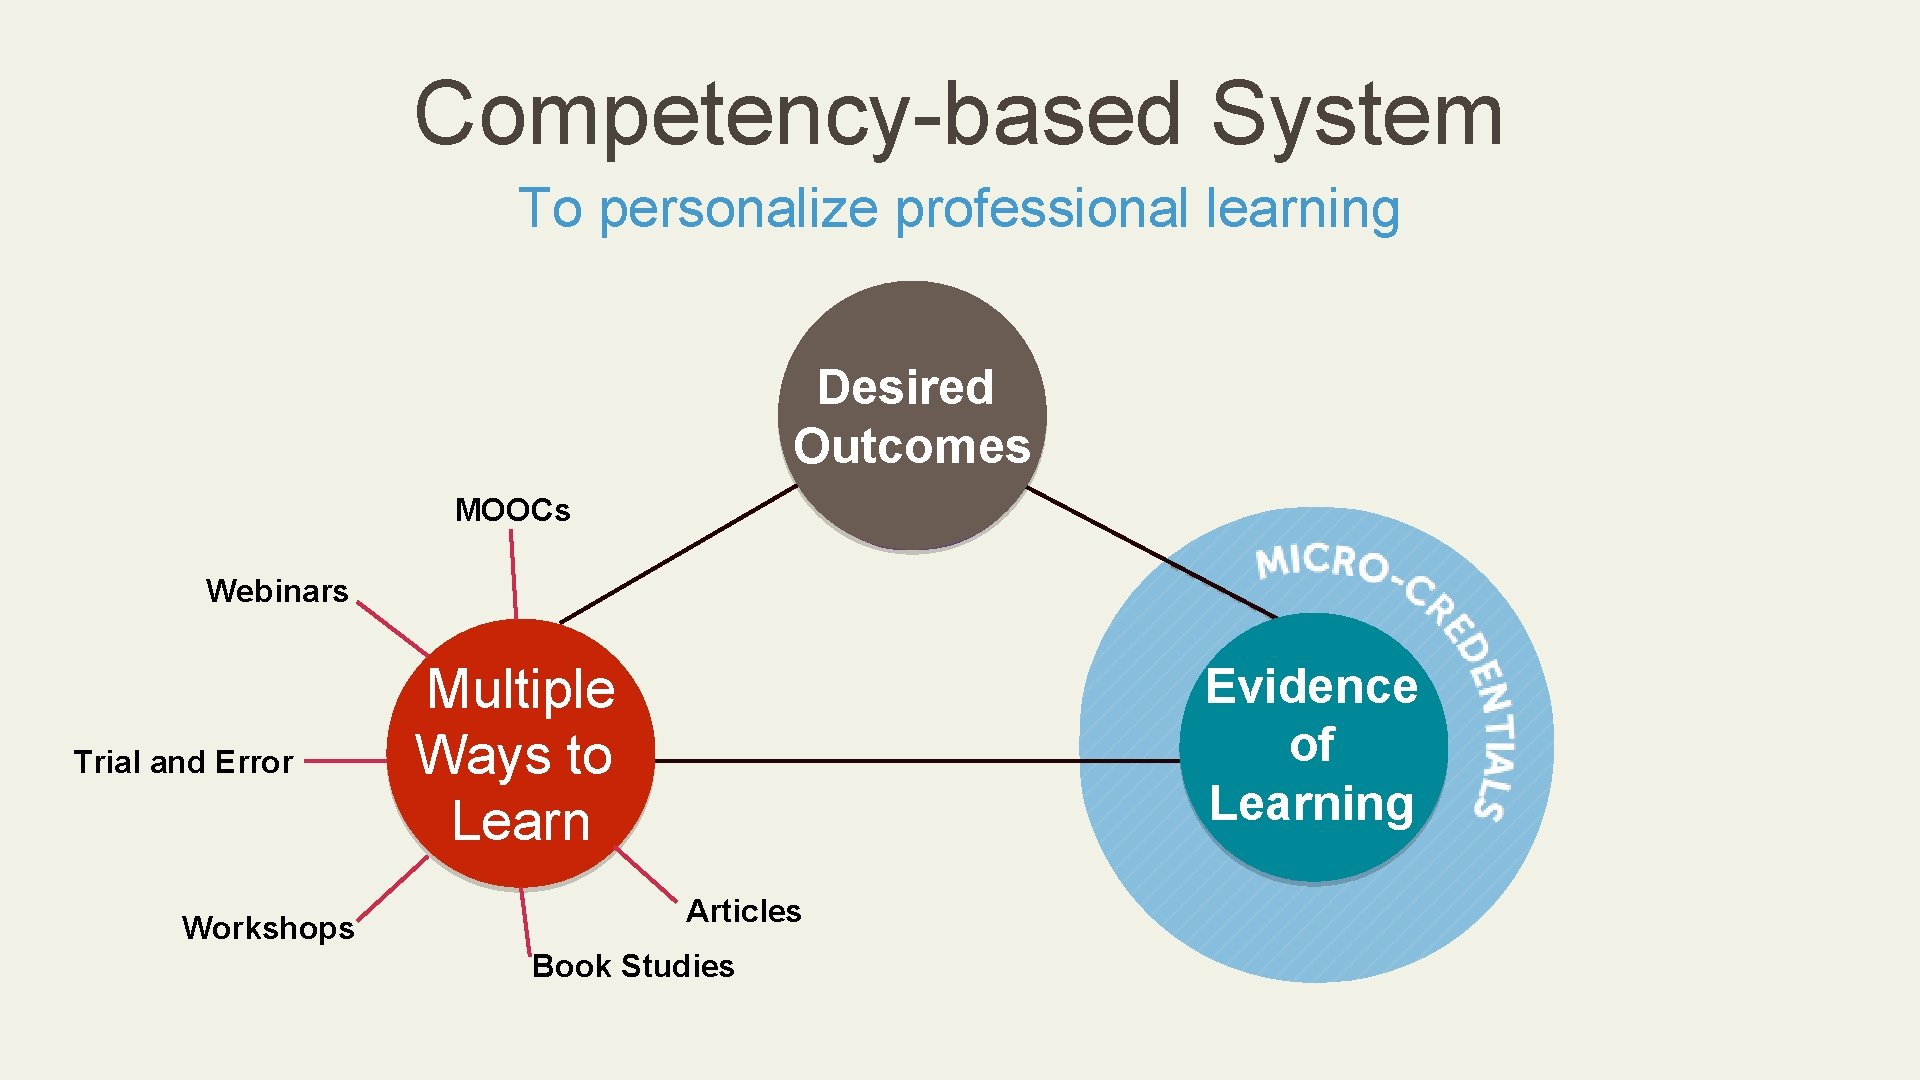 Competency-based System To personalize professional learning Desired Outcomes MOOCs Webinars Trial and Error Workshops